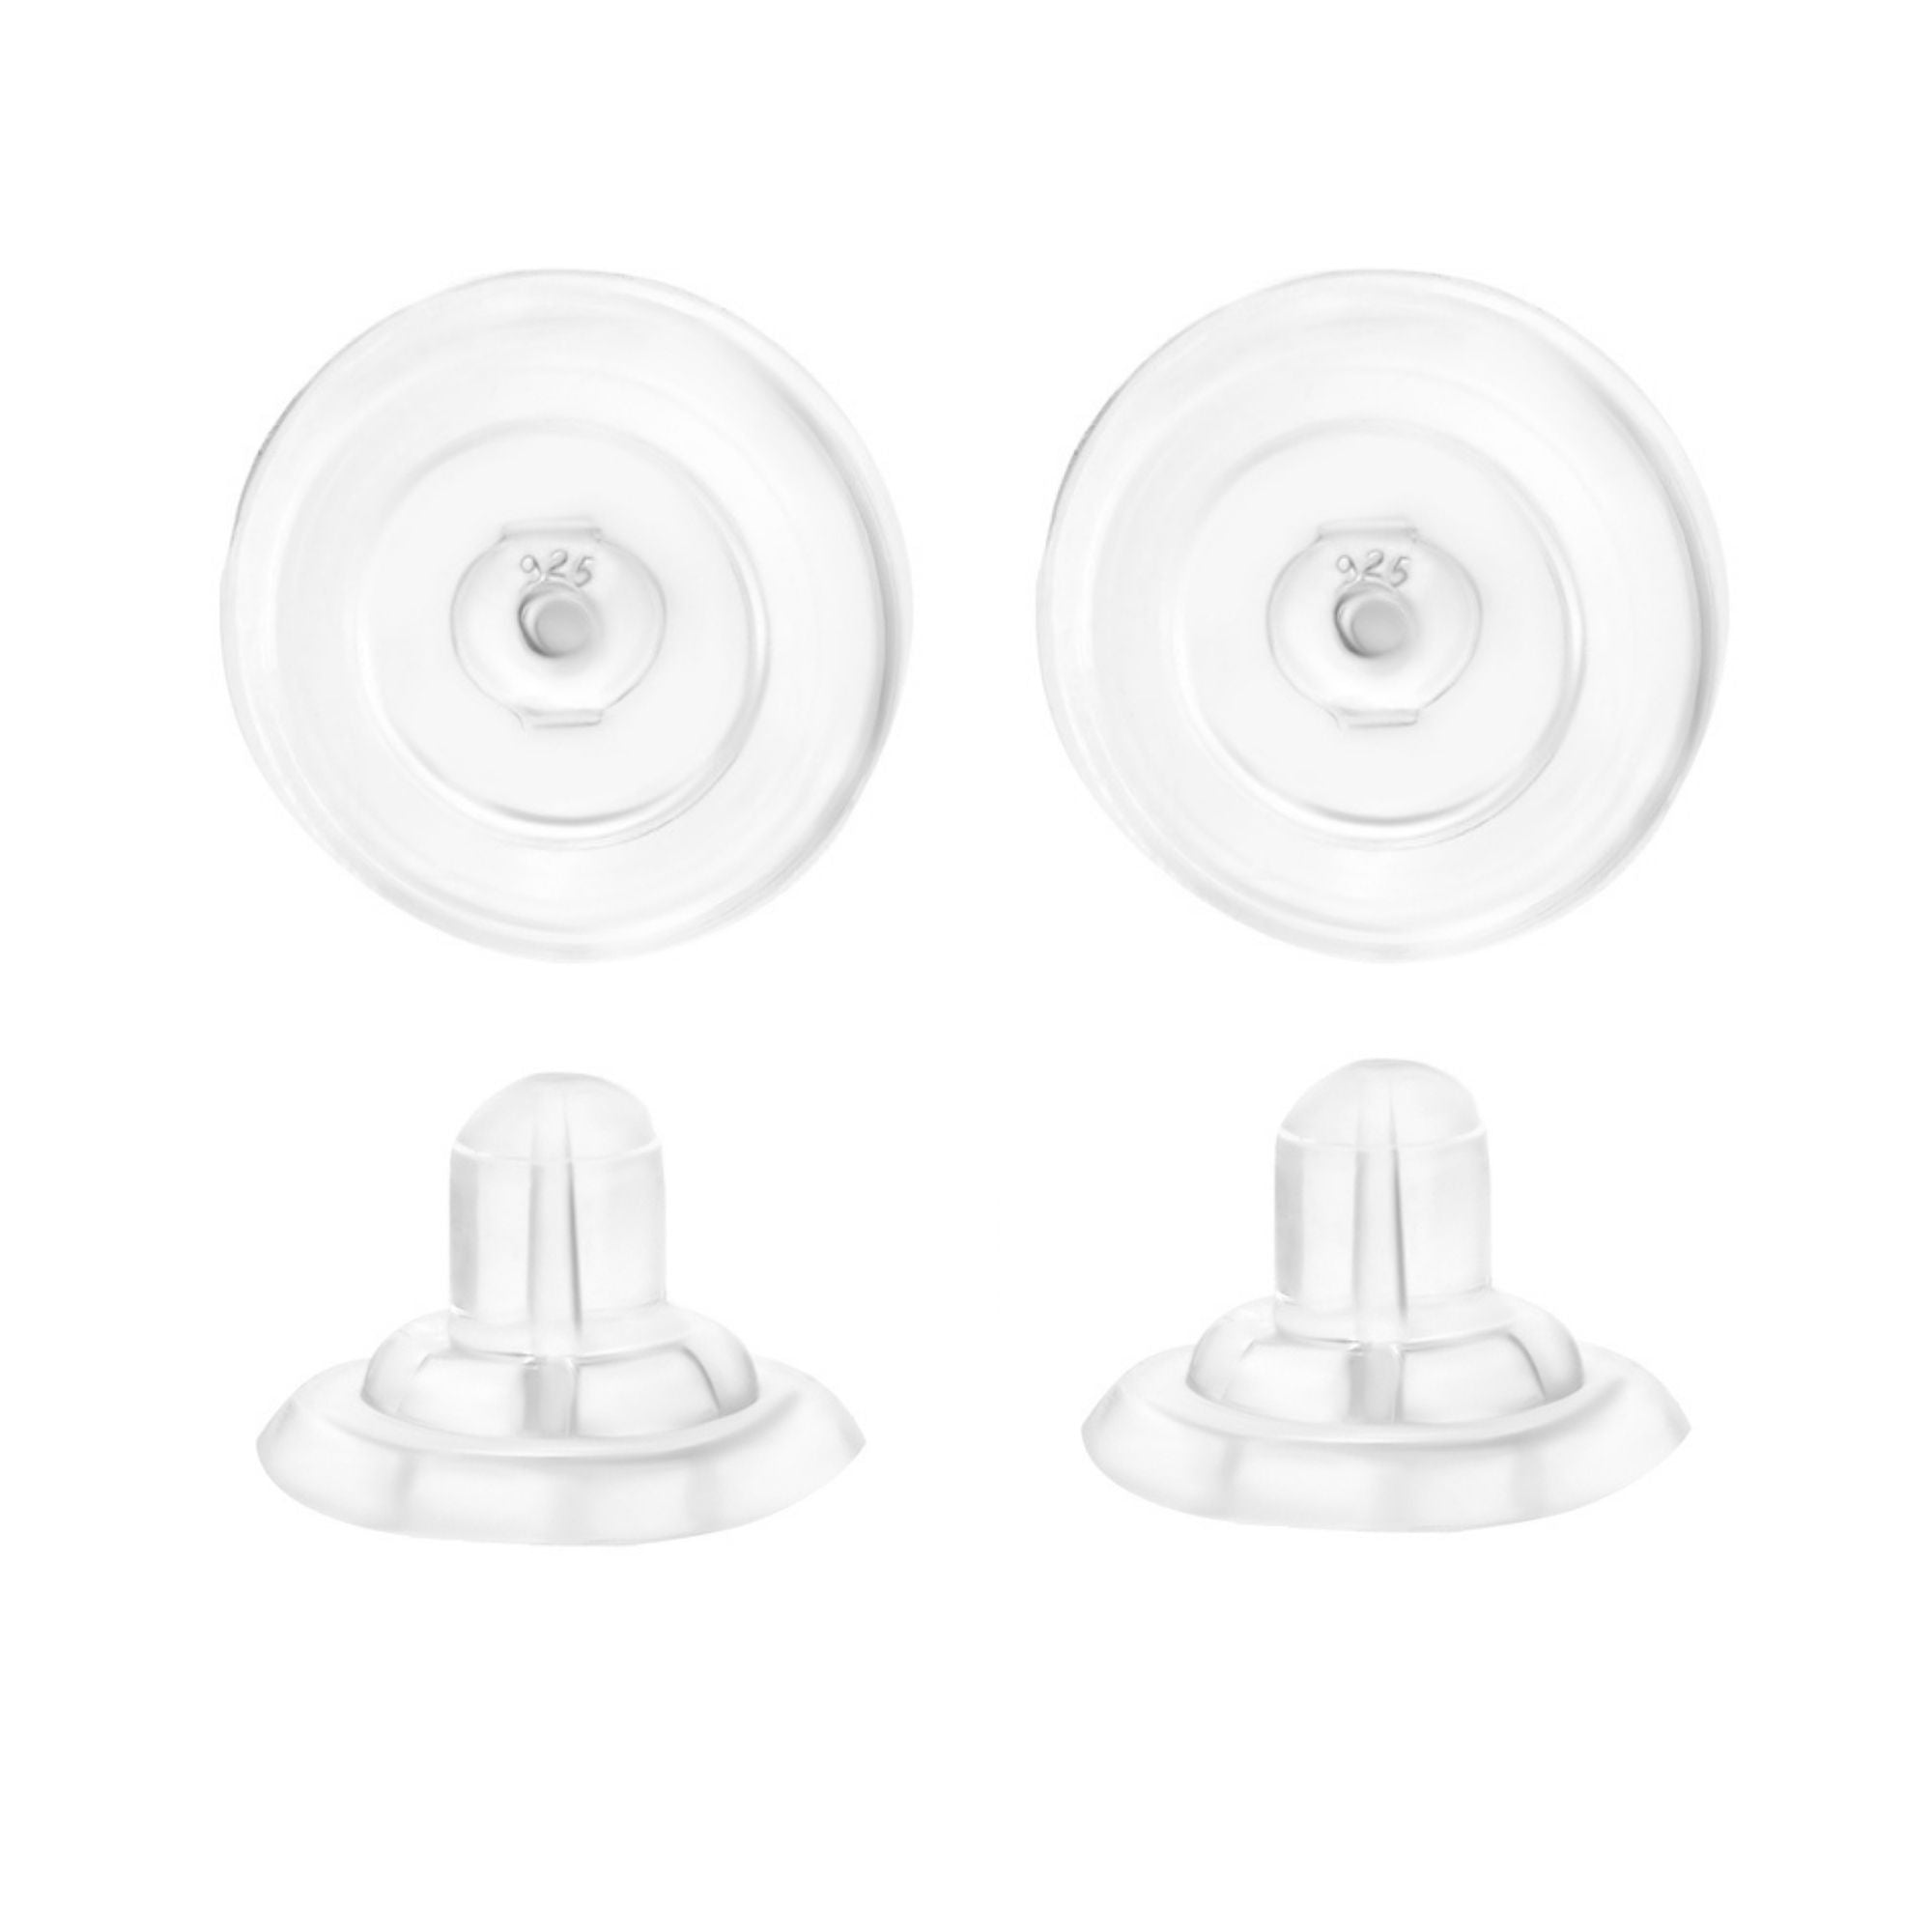 Universal EZback Earring Backs Soft Clear Silicone